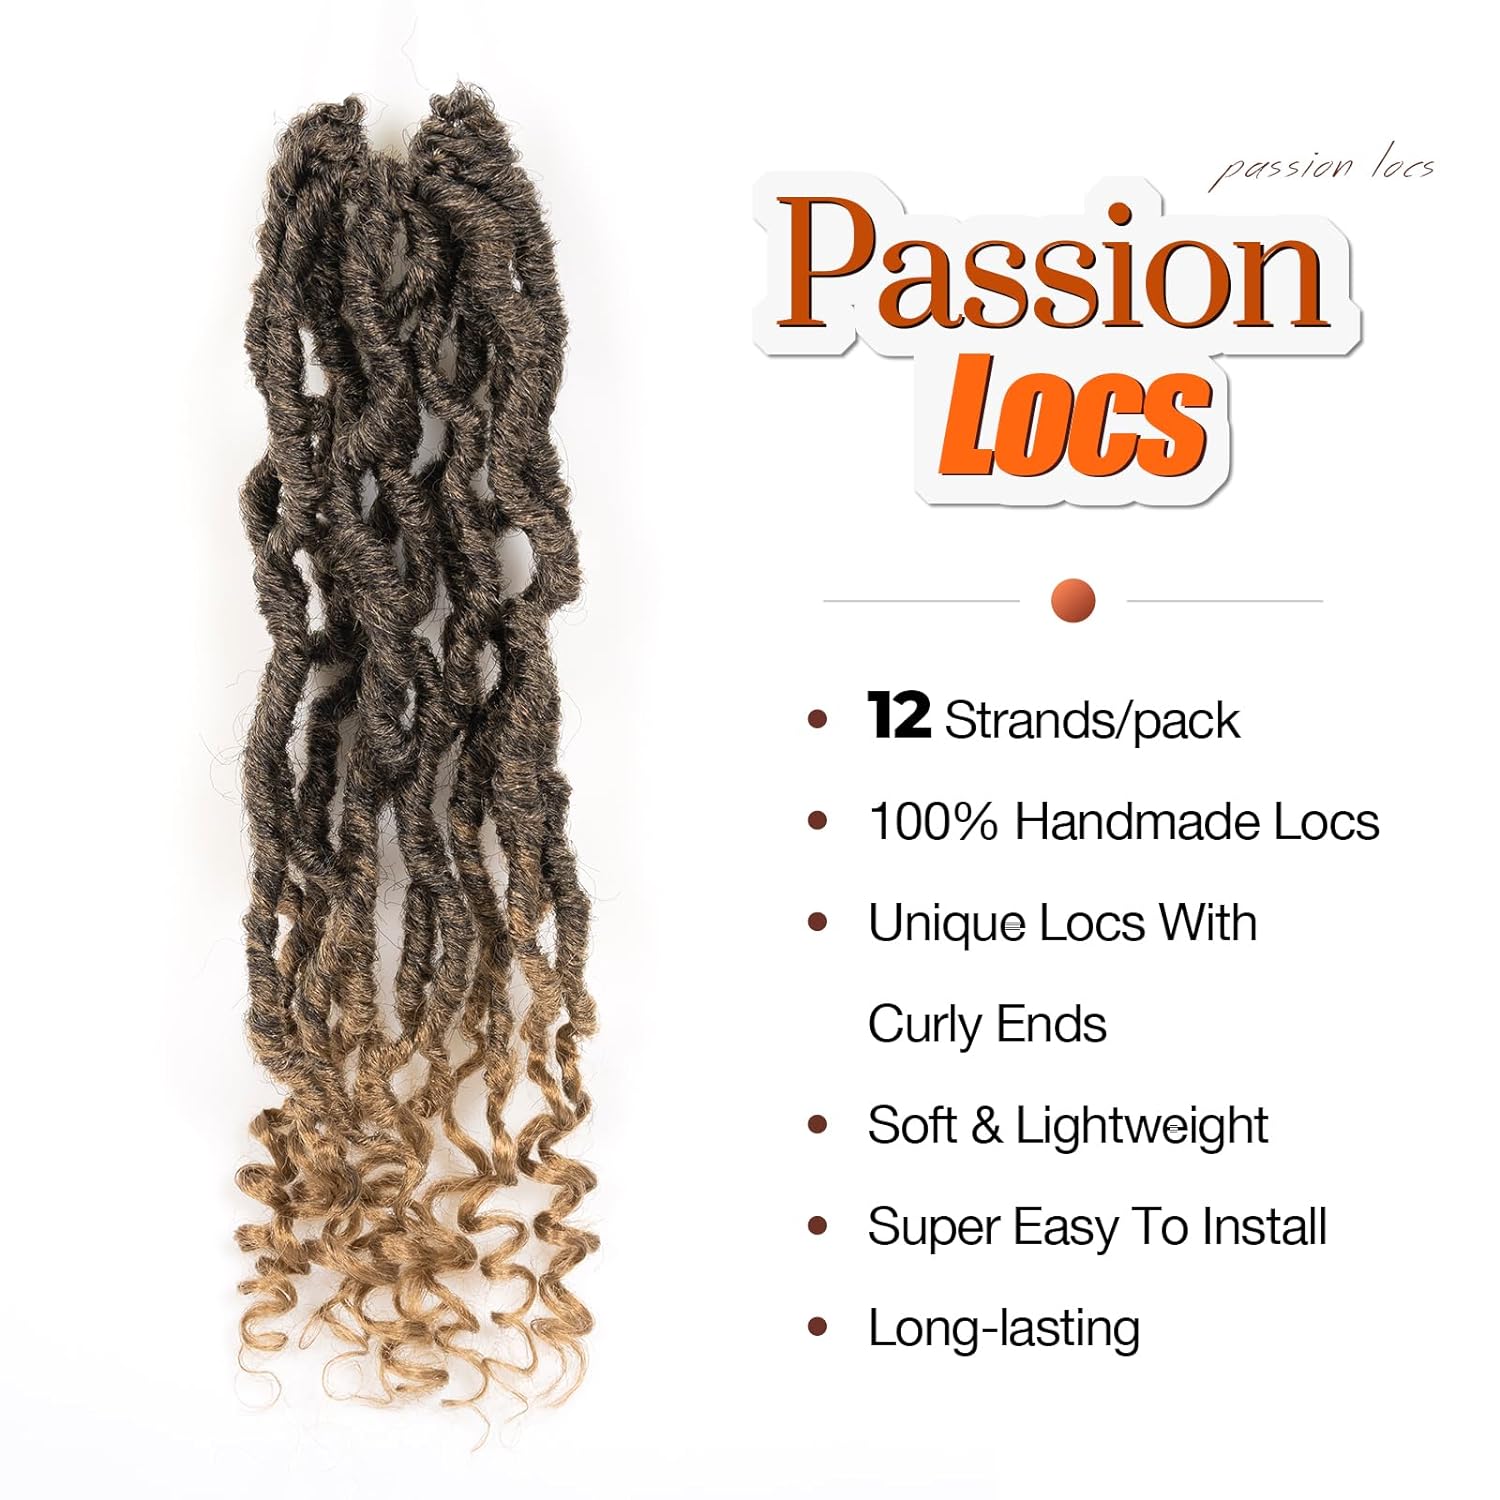 FAST SHIPPING 3-5 DAY PL | Toyotress Passion Faux Locs Crochet Hair - 8 Packs Natural Black Faux Locs Crochet Hair Curly Ends, Short Bob Curly Locs Braids Pre-Looped Synthetic Braiding Hair Extensions